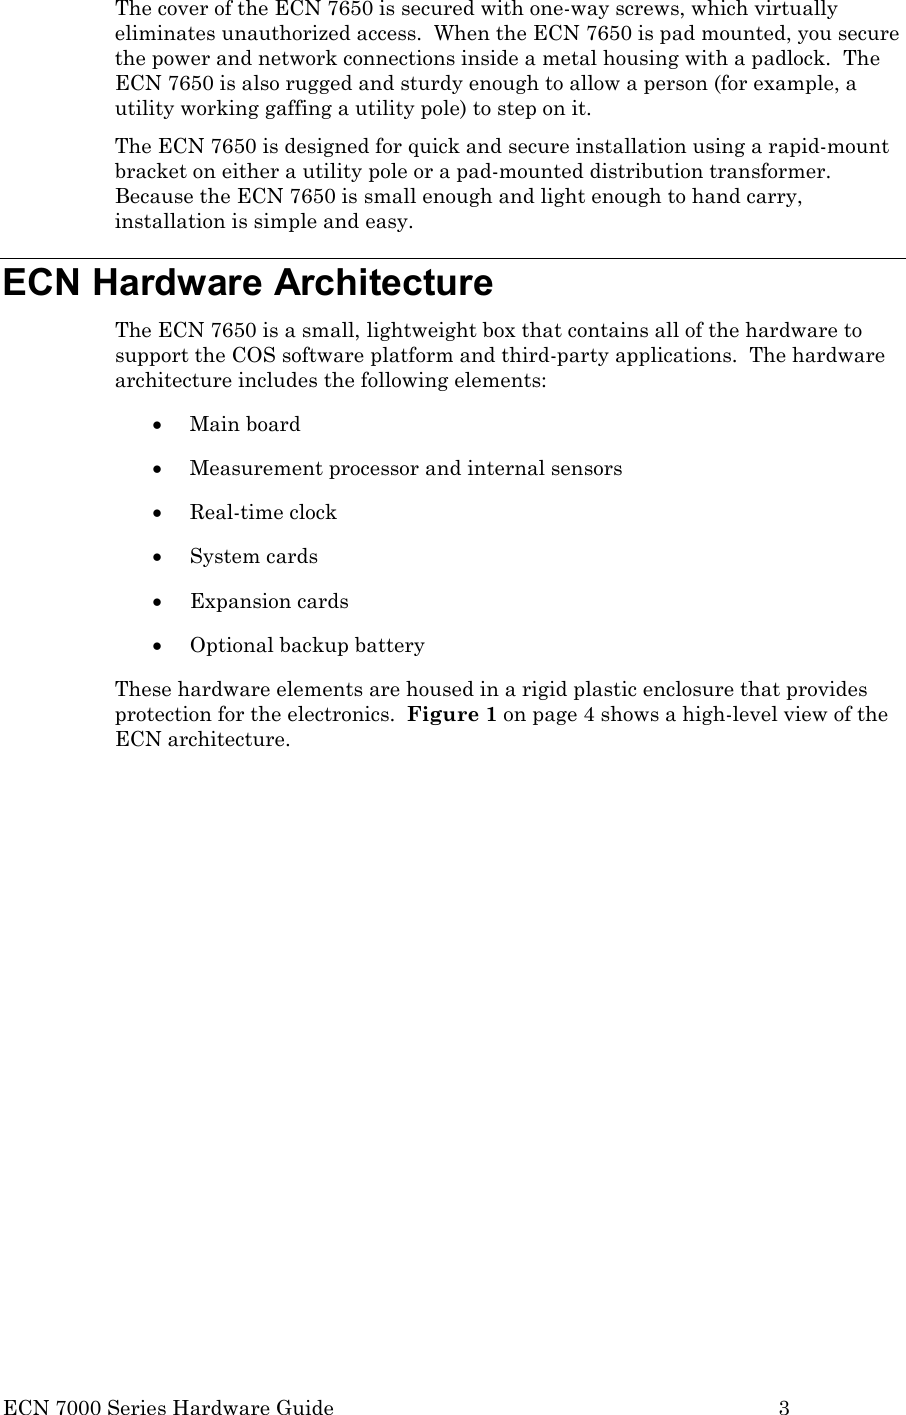  ECN 7000 Series Hardware Guide        3 The cover of the ECN 7650 is secured with one-way screws, which virtually eliminates unauthorized access.  When the ECN 7650 is pad mounted, you secure the power and network connections inside a metal housing with a padlock.  The ECN 7650 is also rugged and sturdy enough to allow a person (for example, a utility working gaffing a utility pole) to step on it. The ECN 7650 is designed for quick and secure installation using a rapid-mount bracket on either a utility pole or a pad-mounted distribution transformer.  Because the ECN 7650 is small enough and light enough to hand carry, installation is simple and easy. ECN Hardware Architecture The ECN 7650 is a small, lightweight box that contains all of the hardware to support the COS software platform and third-party applications.  The hardware architecture includes the following elements: • Main board • Measurement processor and internal sensors • Real-time clock • System cards • Expansion cards • Optional backup battery These hardware elements are housed in a rigid plastic enclosure that provides protection for the electronics.  Figure 1 on page 4 shows a high-level view of the ECN architecture. 